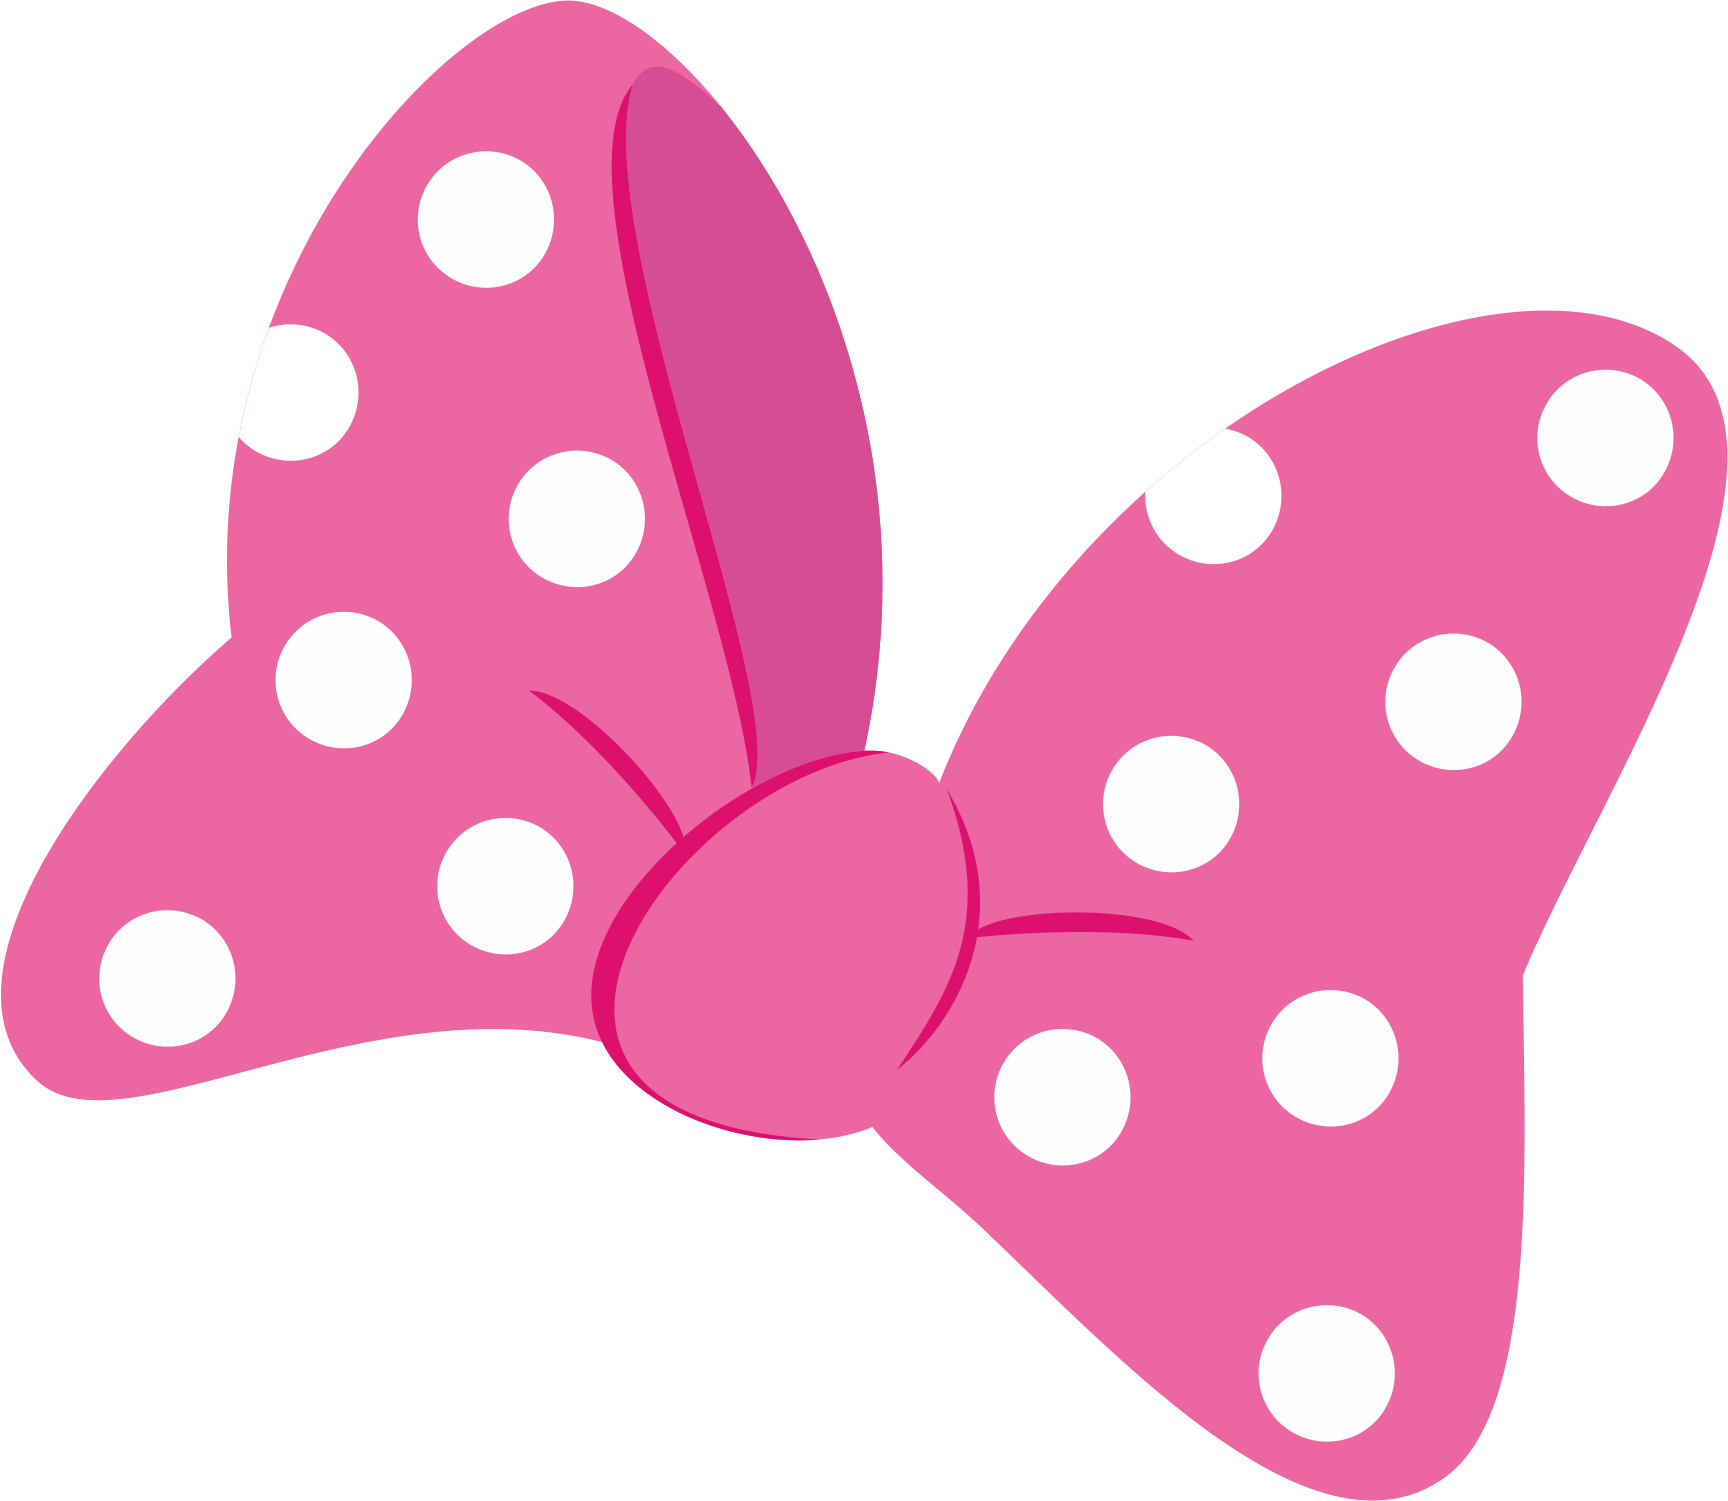 Ribbon clipart minnie mouse #4